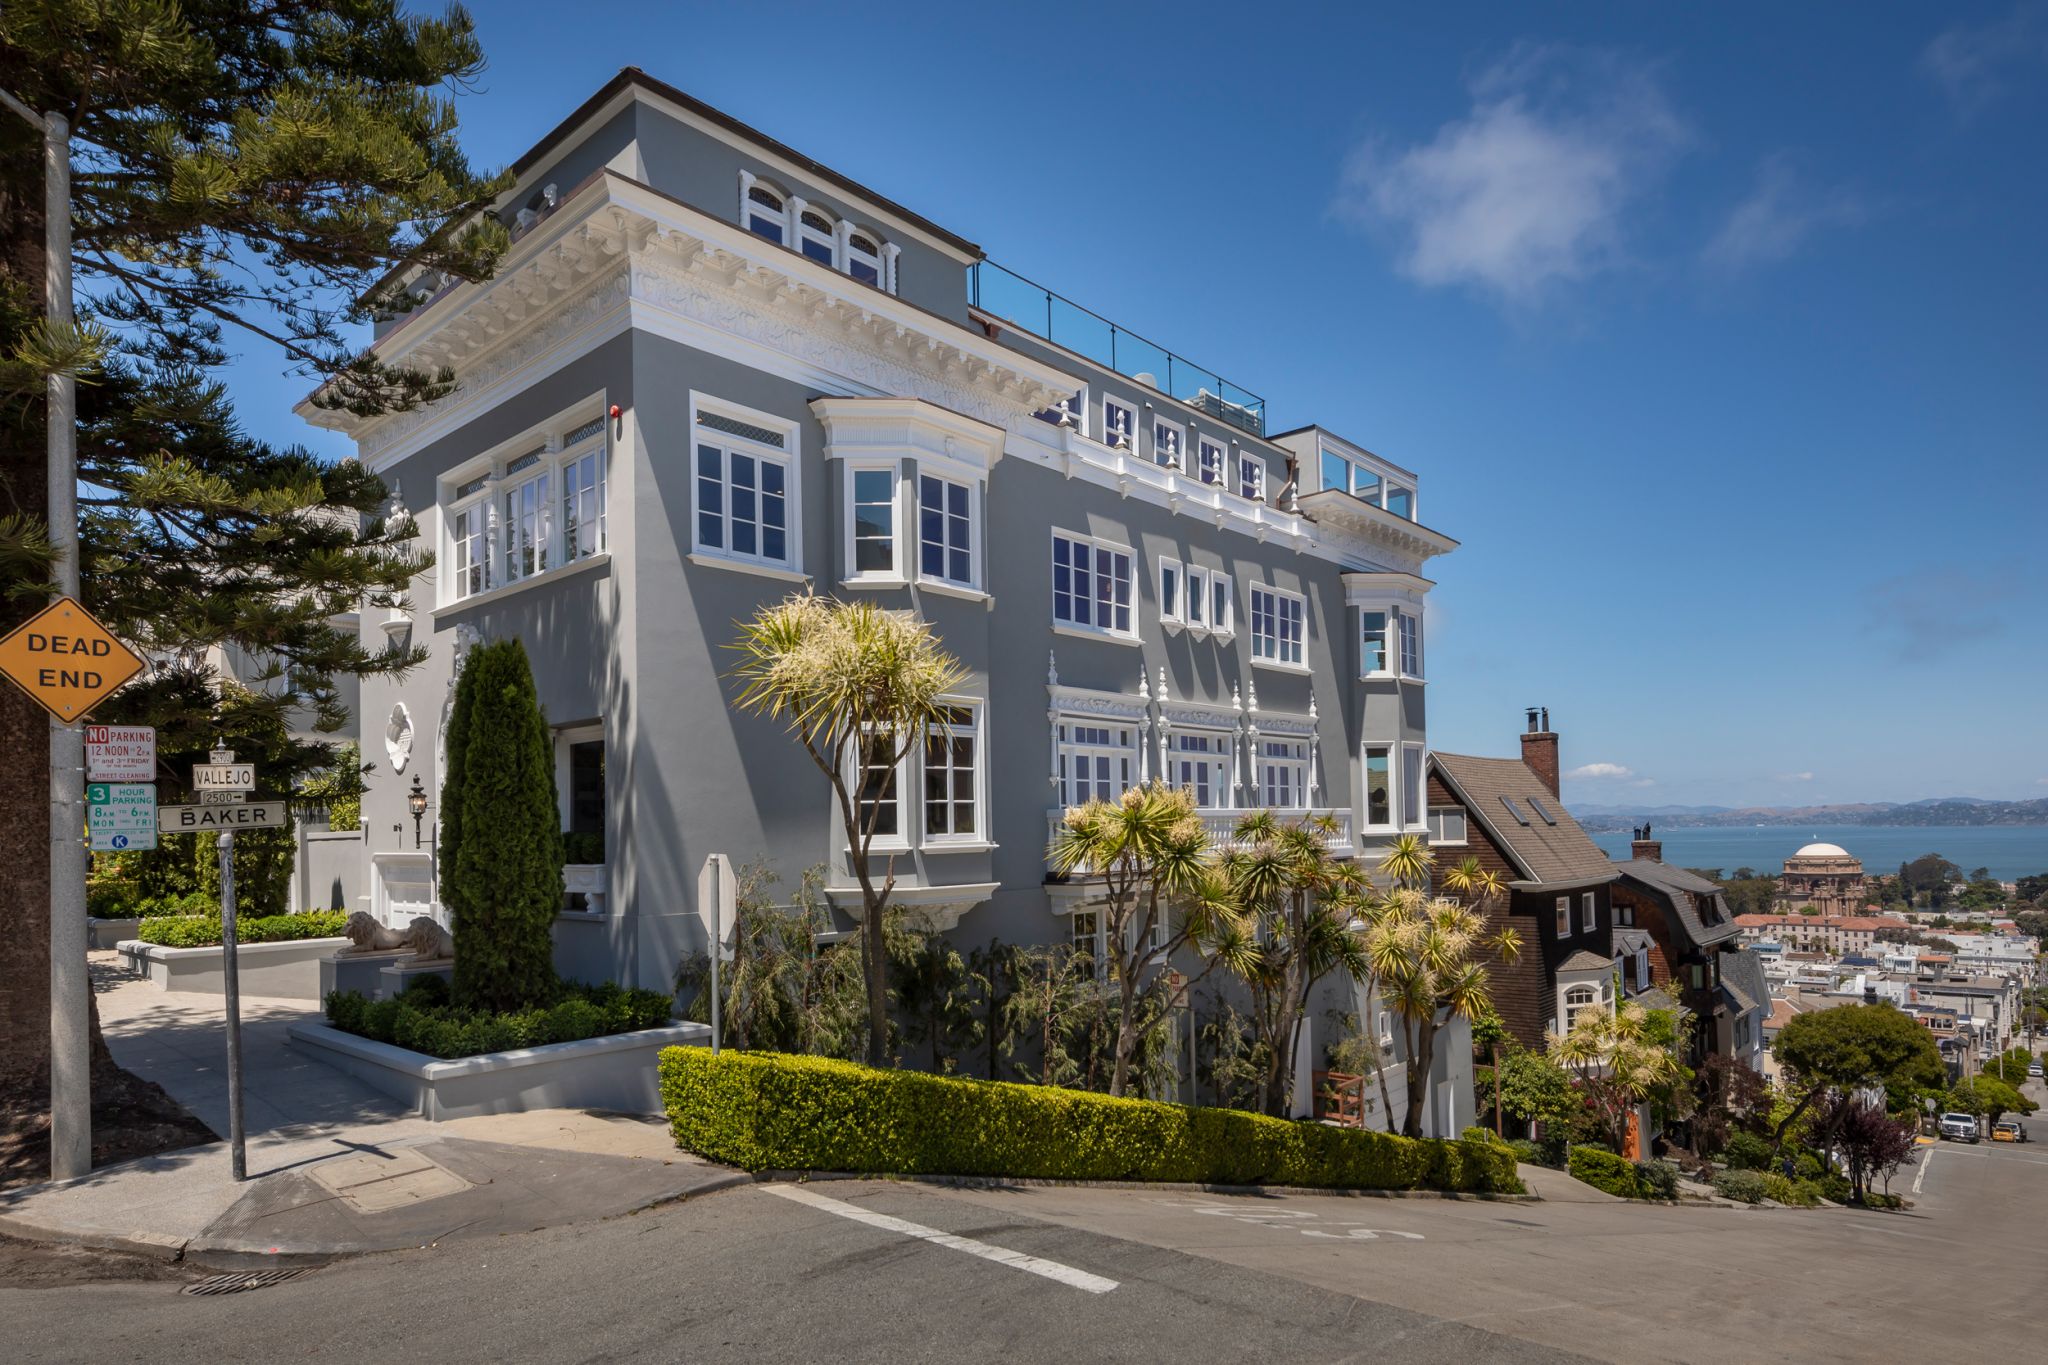 Stunning Pacific Heights Mansion Where Vanessa Getty Once Lived Asks 30 Million